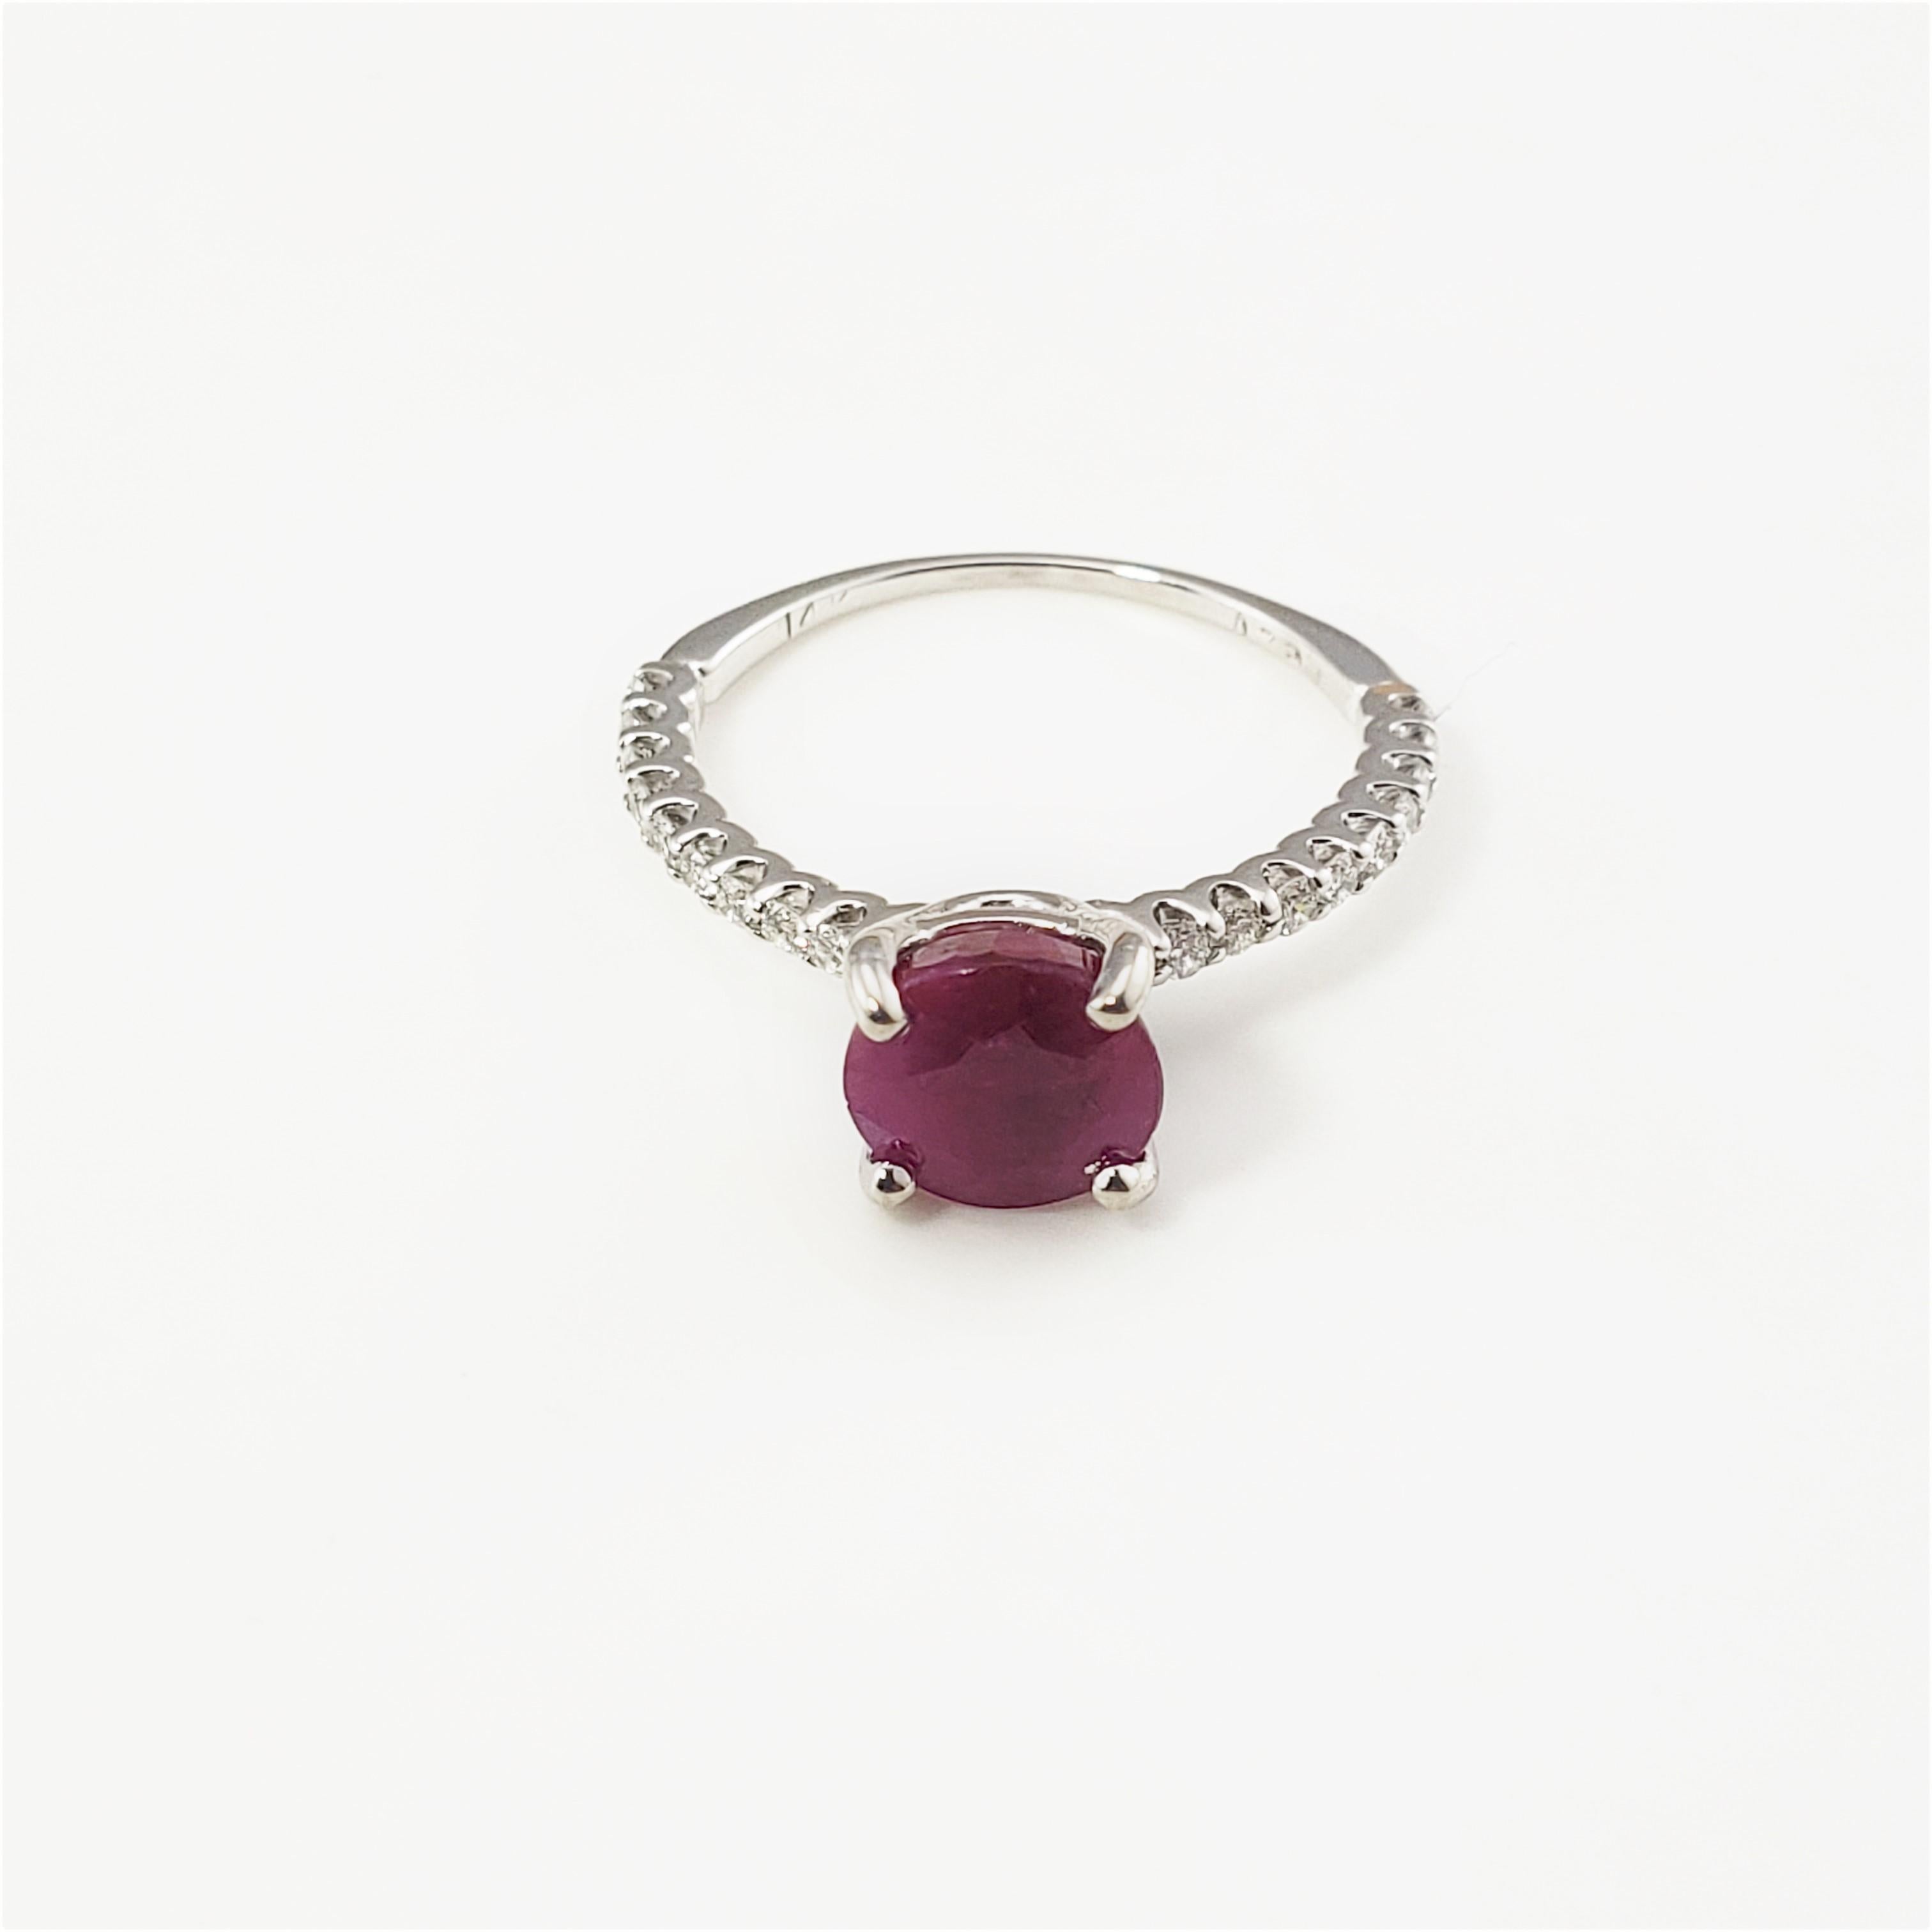 14 Karat White Gold Ruby and Diamond Ring Size 5.5 GAI Certified-

This lovely ring features one round ruby (7 mm) and 18 round brilliant cut diamonds set in classic 14K white gold.  Shank:  1 mm.

Ruby weight:  2.07 ct.

Total diamond weight:  .20